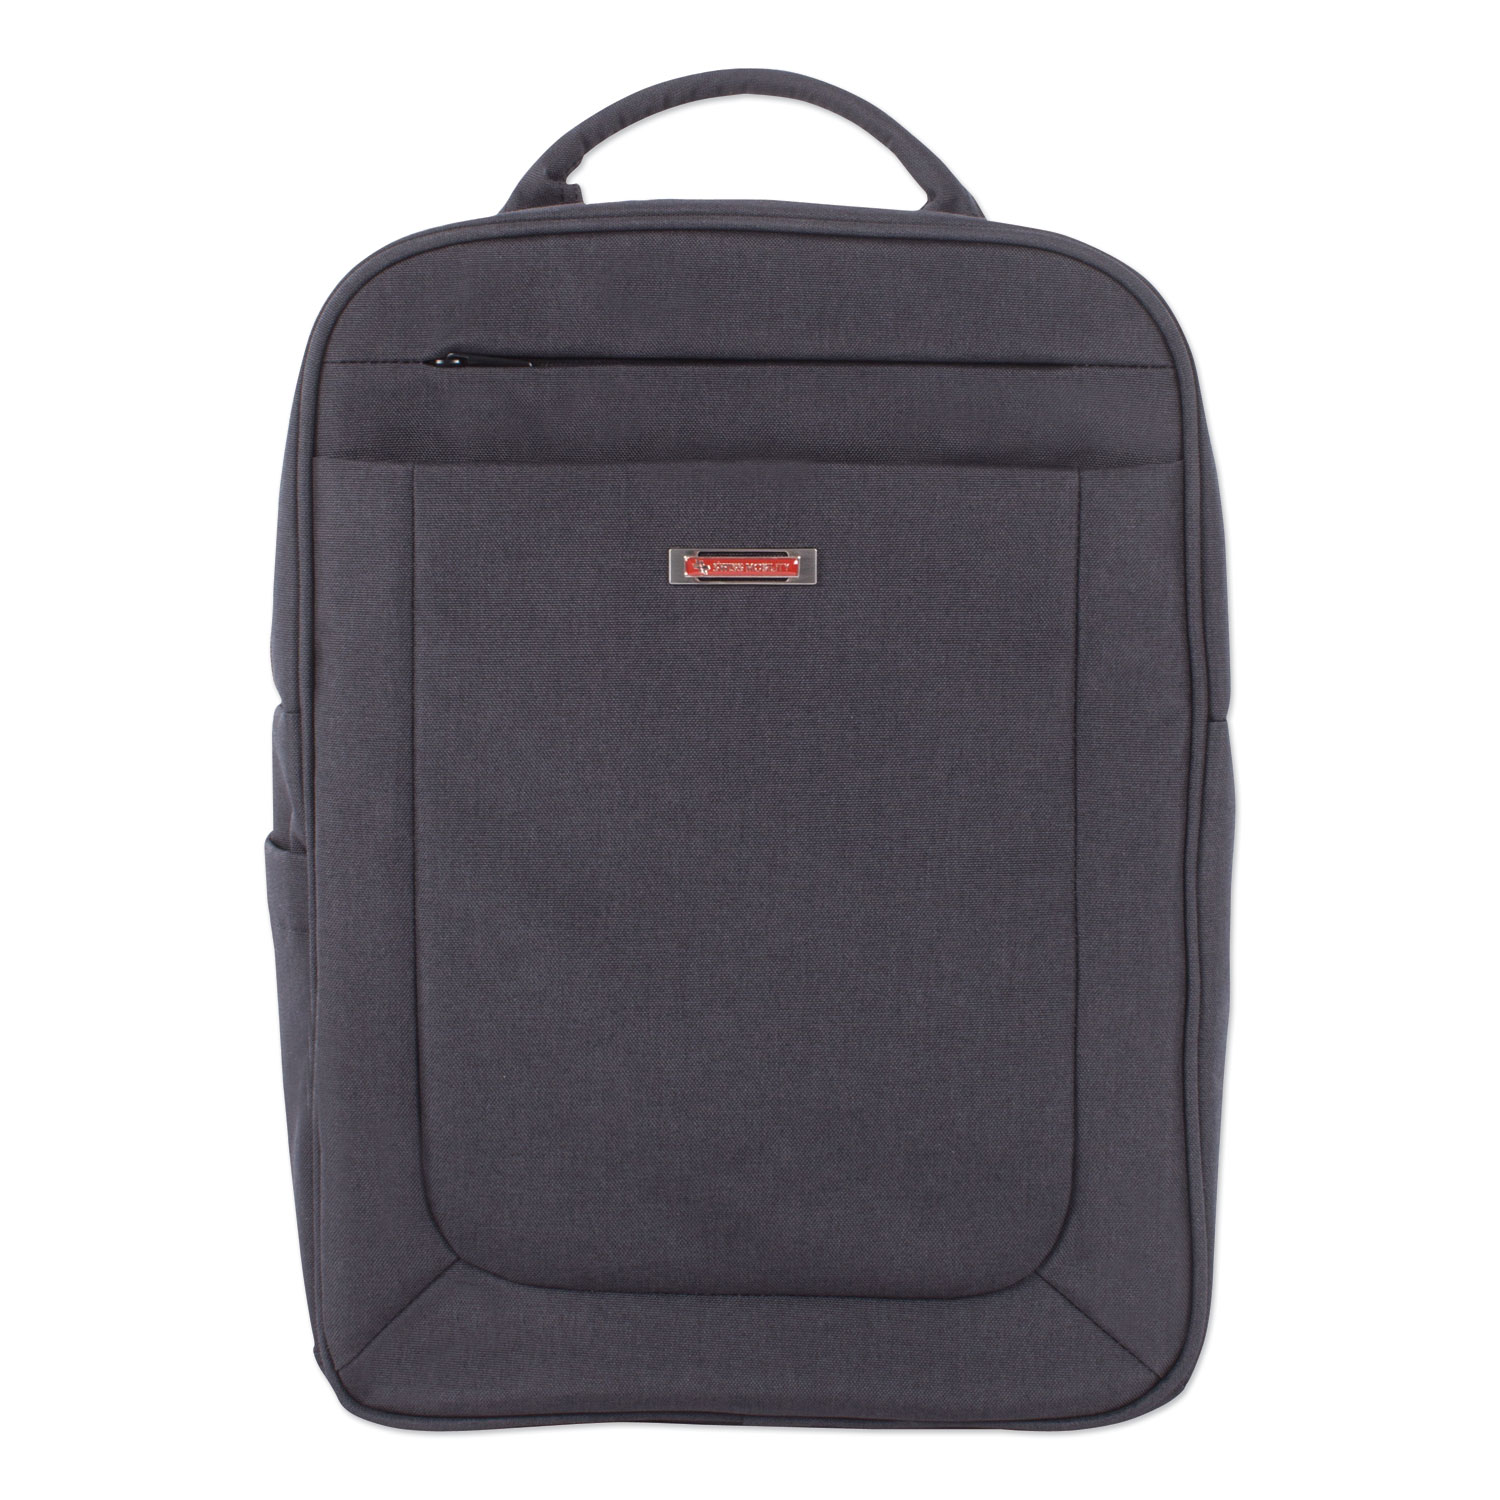  Swiss Mobility BKP1012SMCH Cadence 2 Section Business Backpack, For Laptops 15.6, 6 x 6 x 17, Charcoal (SWZBKP1012SMCH) 